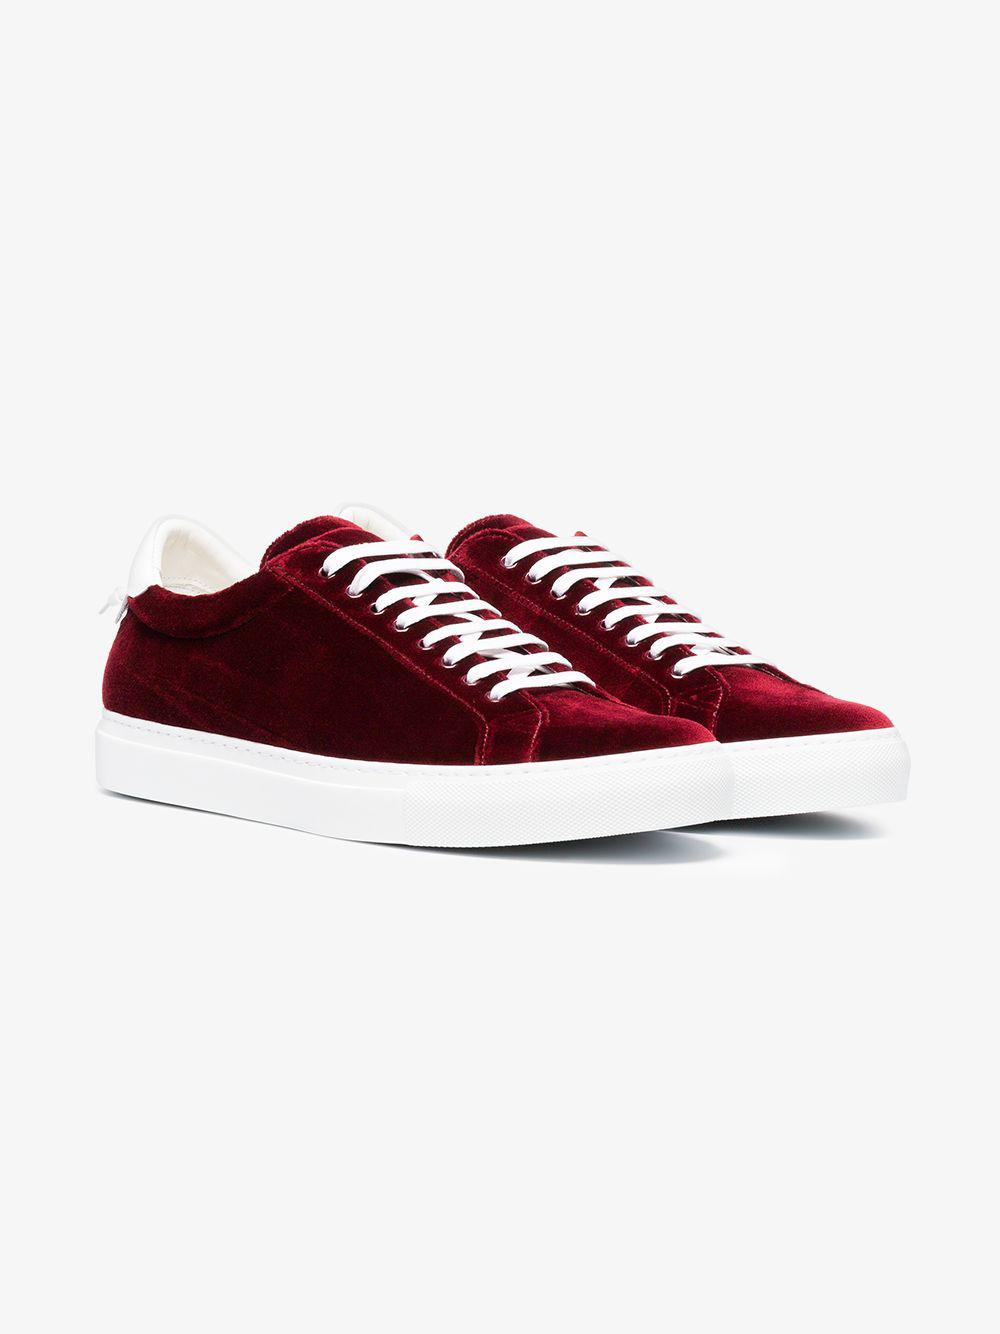 Givenchy Urban Street Velvet Low-top Sneakers in Burgundy (Red) for Men -  Lyst